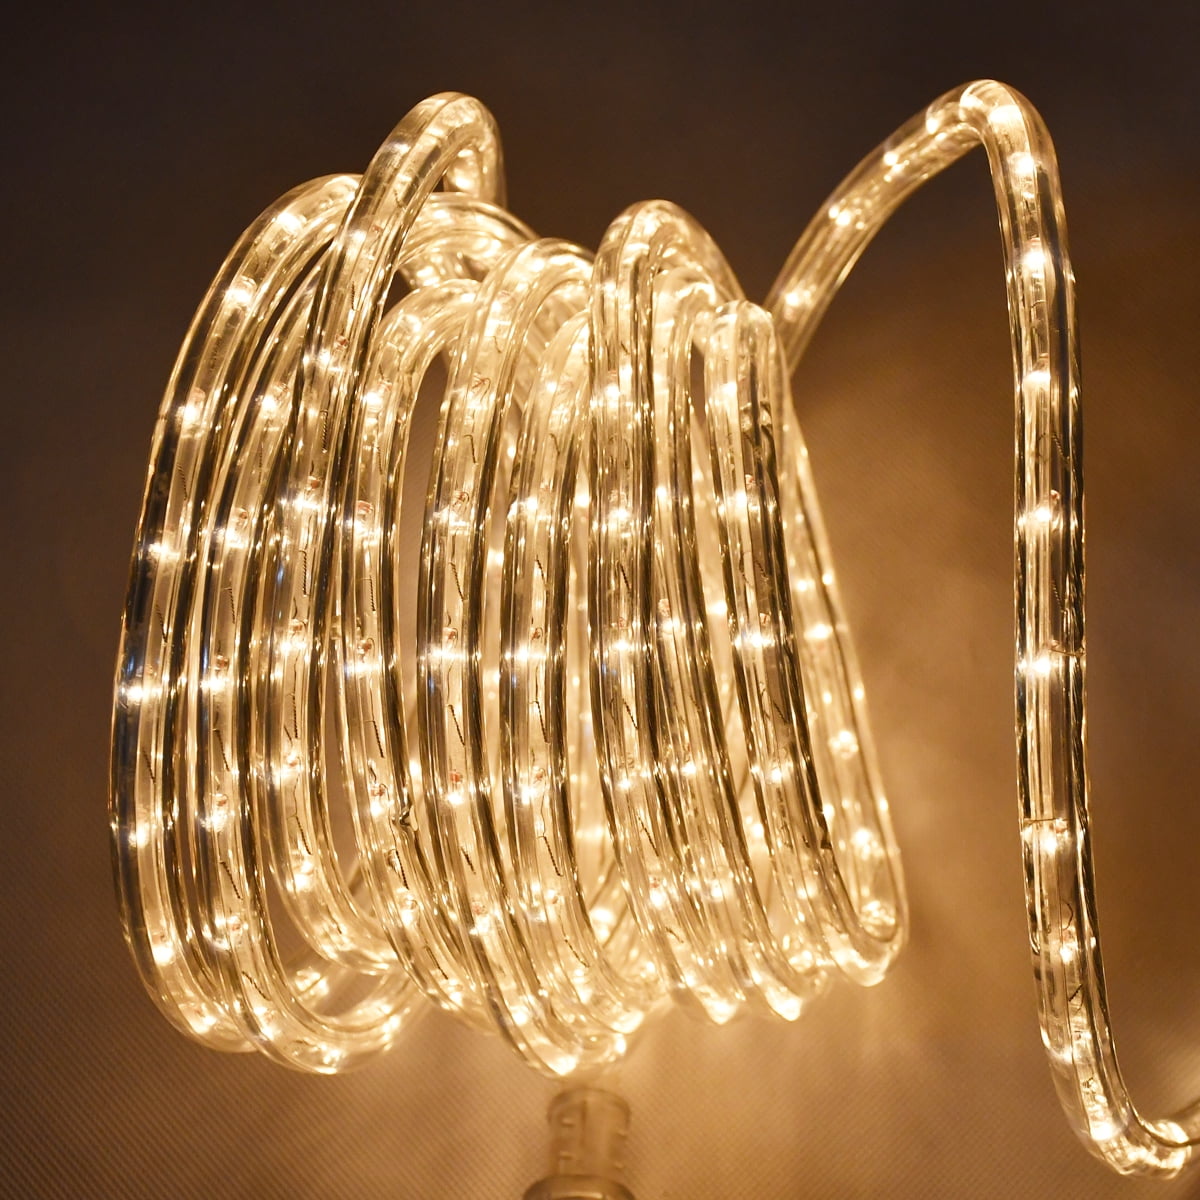 Mainstays 18 Foot PVC Linkable Flexible Outdoor Rope Light